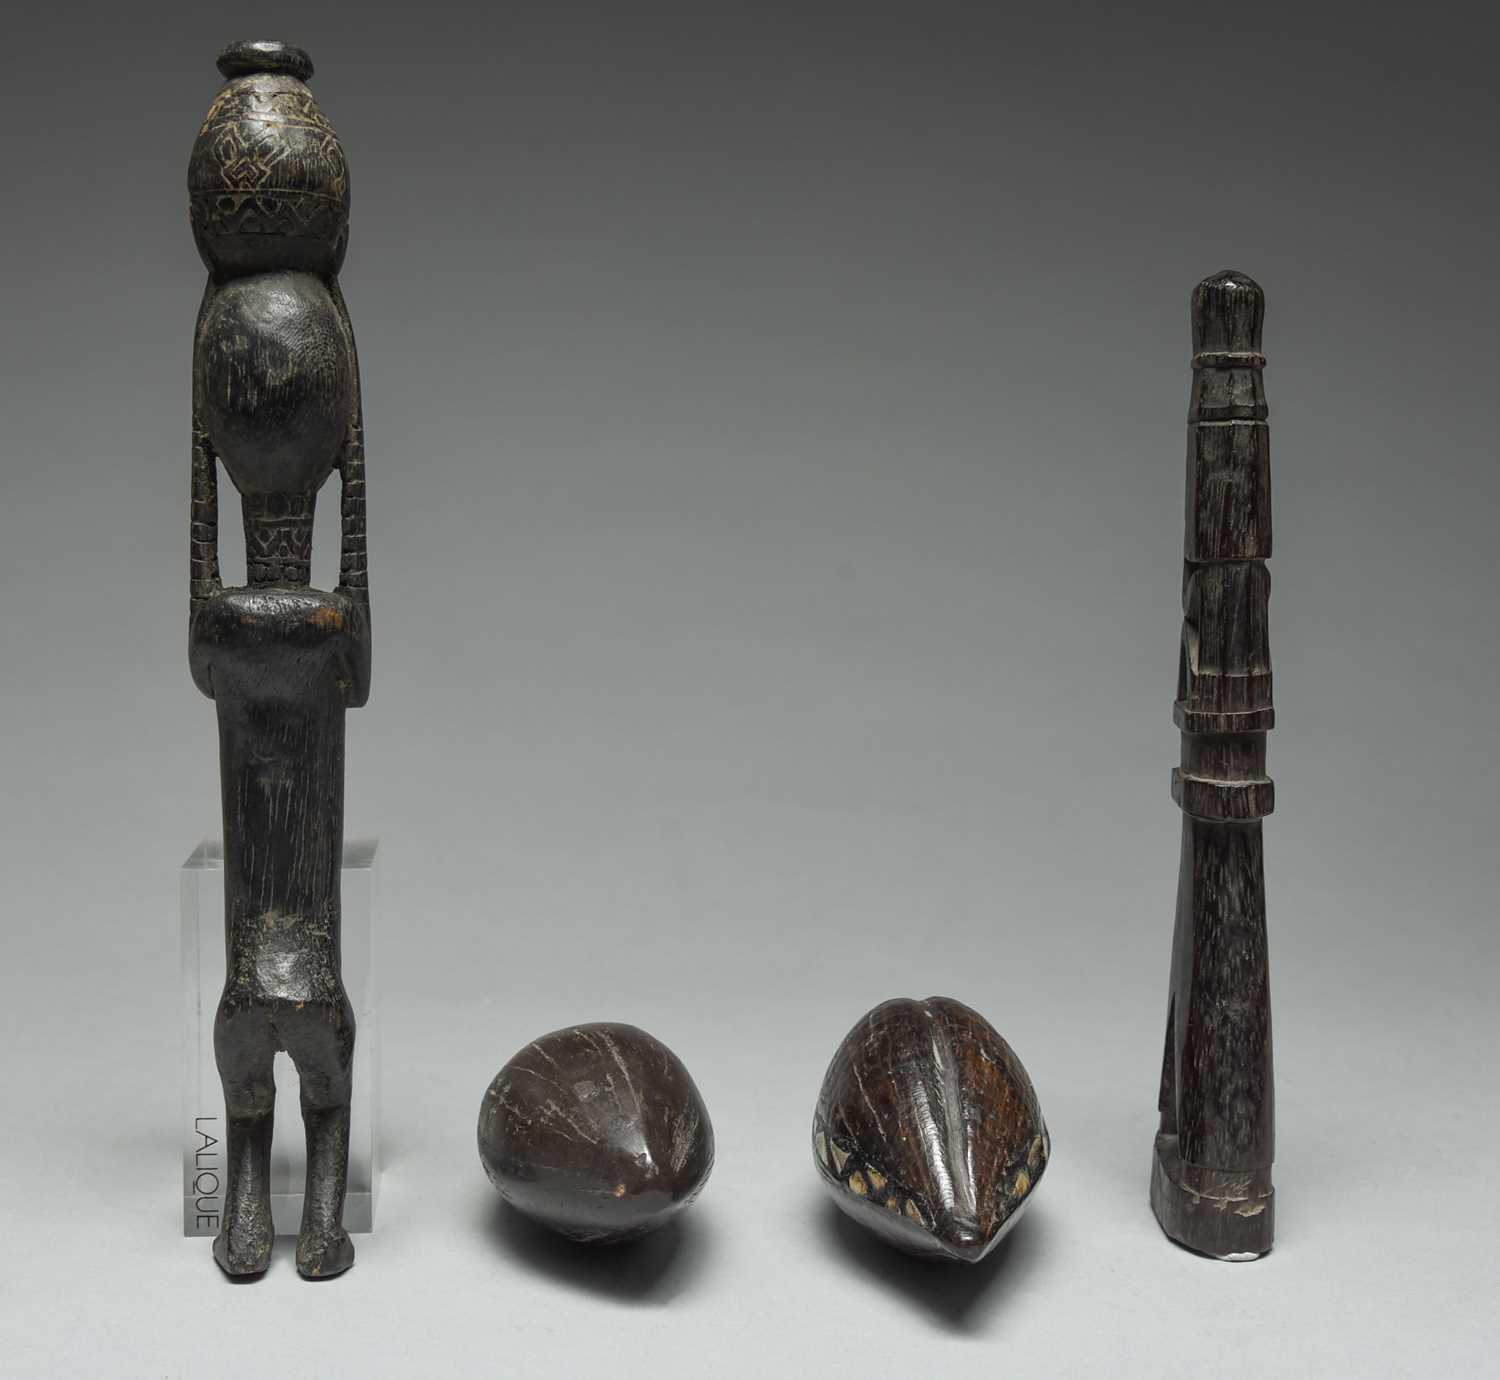 A Korwar float / charm Irian Jaya, Indonesia carved with a seated figure and with an open base, - Image 4 of 4